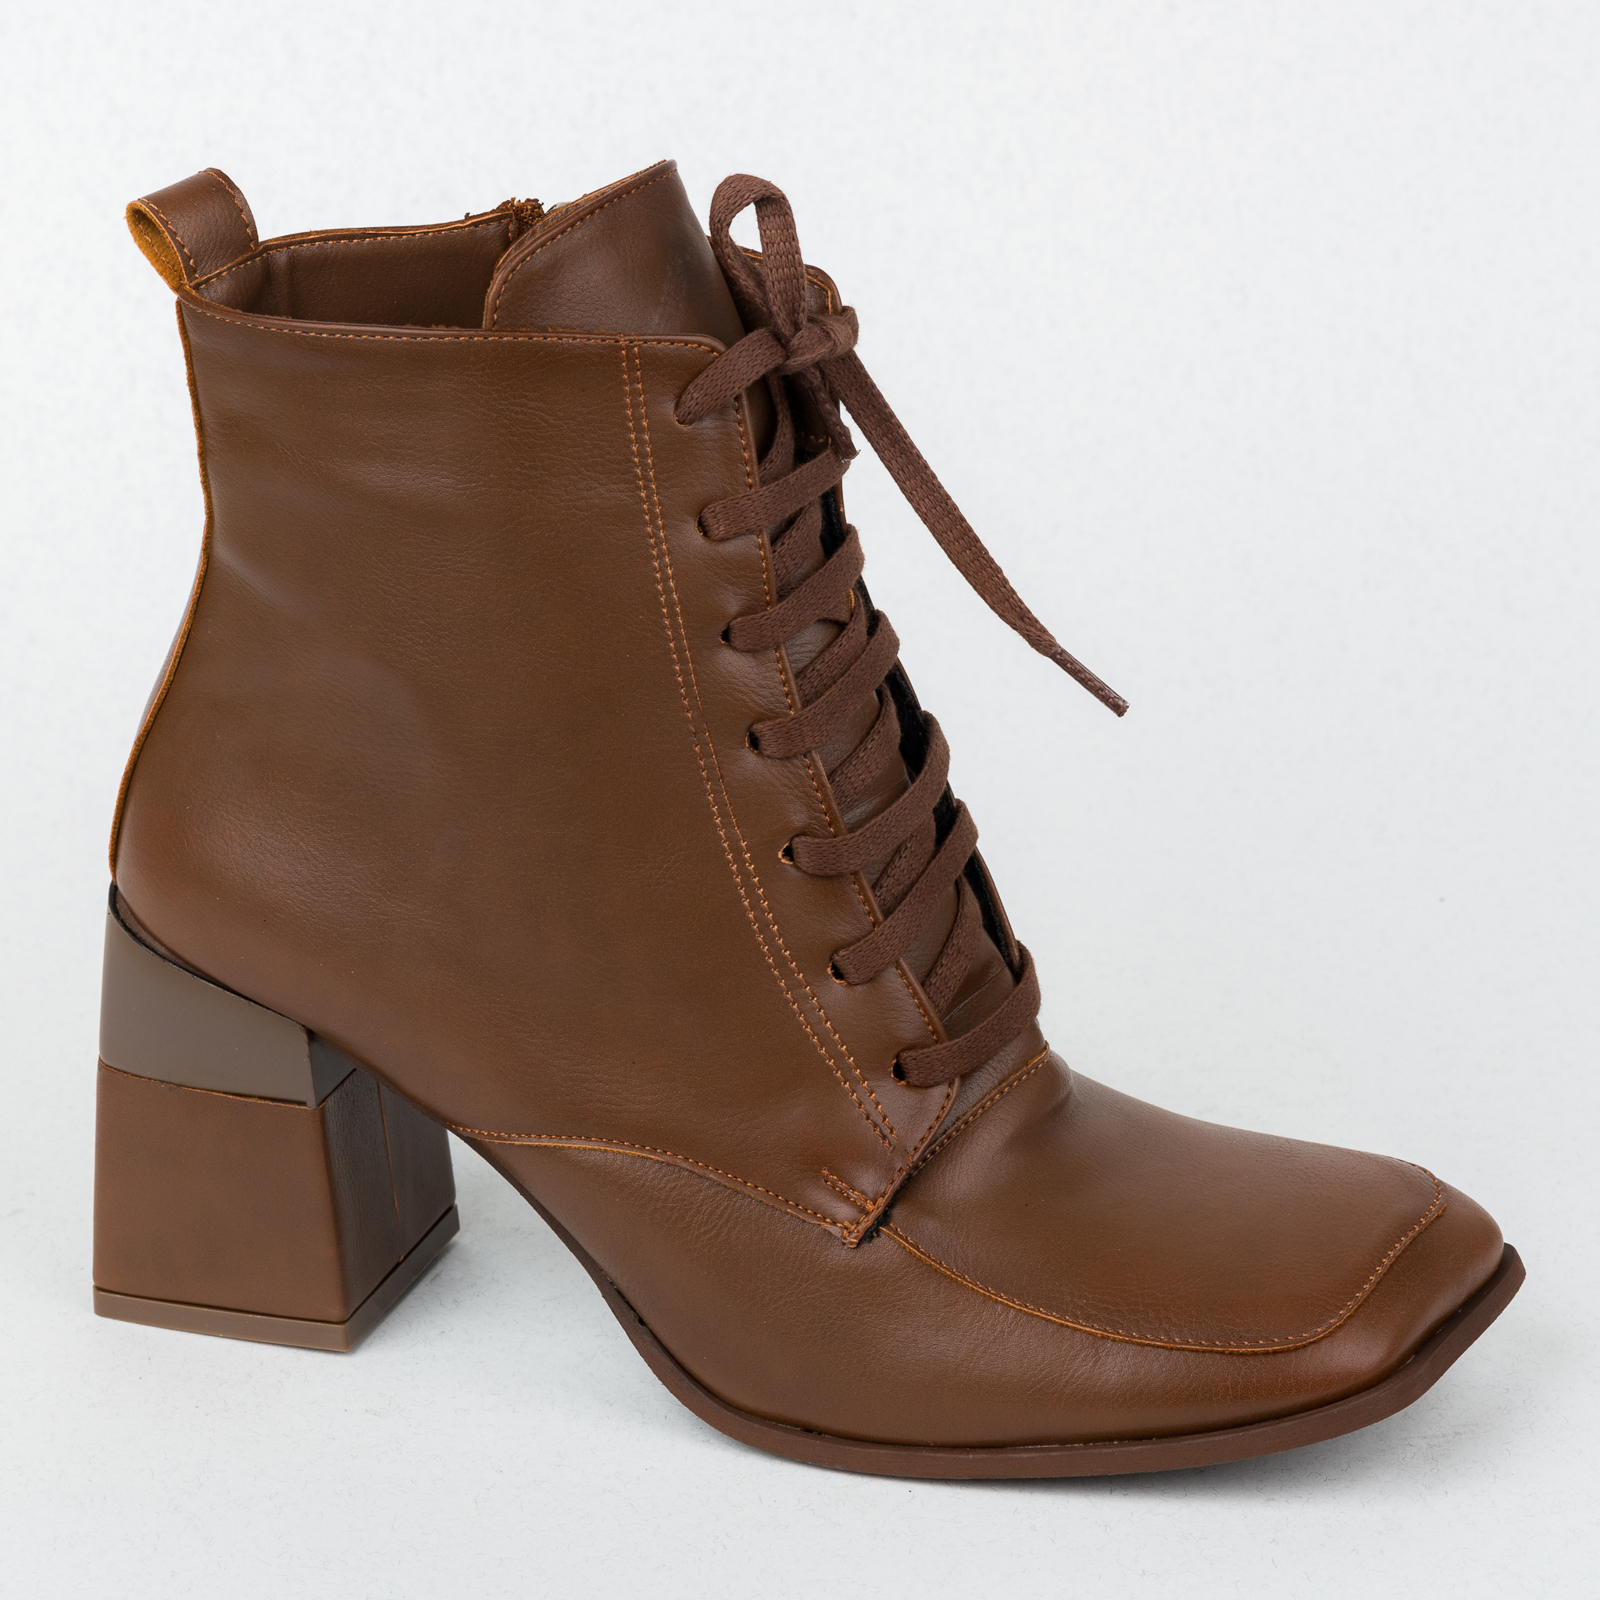 Women ankle boots B495 - CAMEL